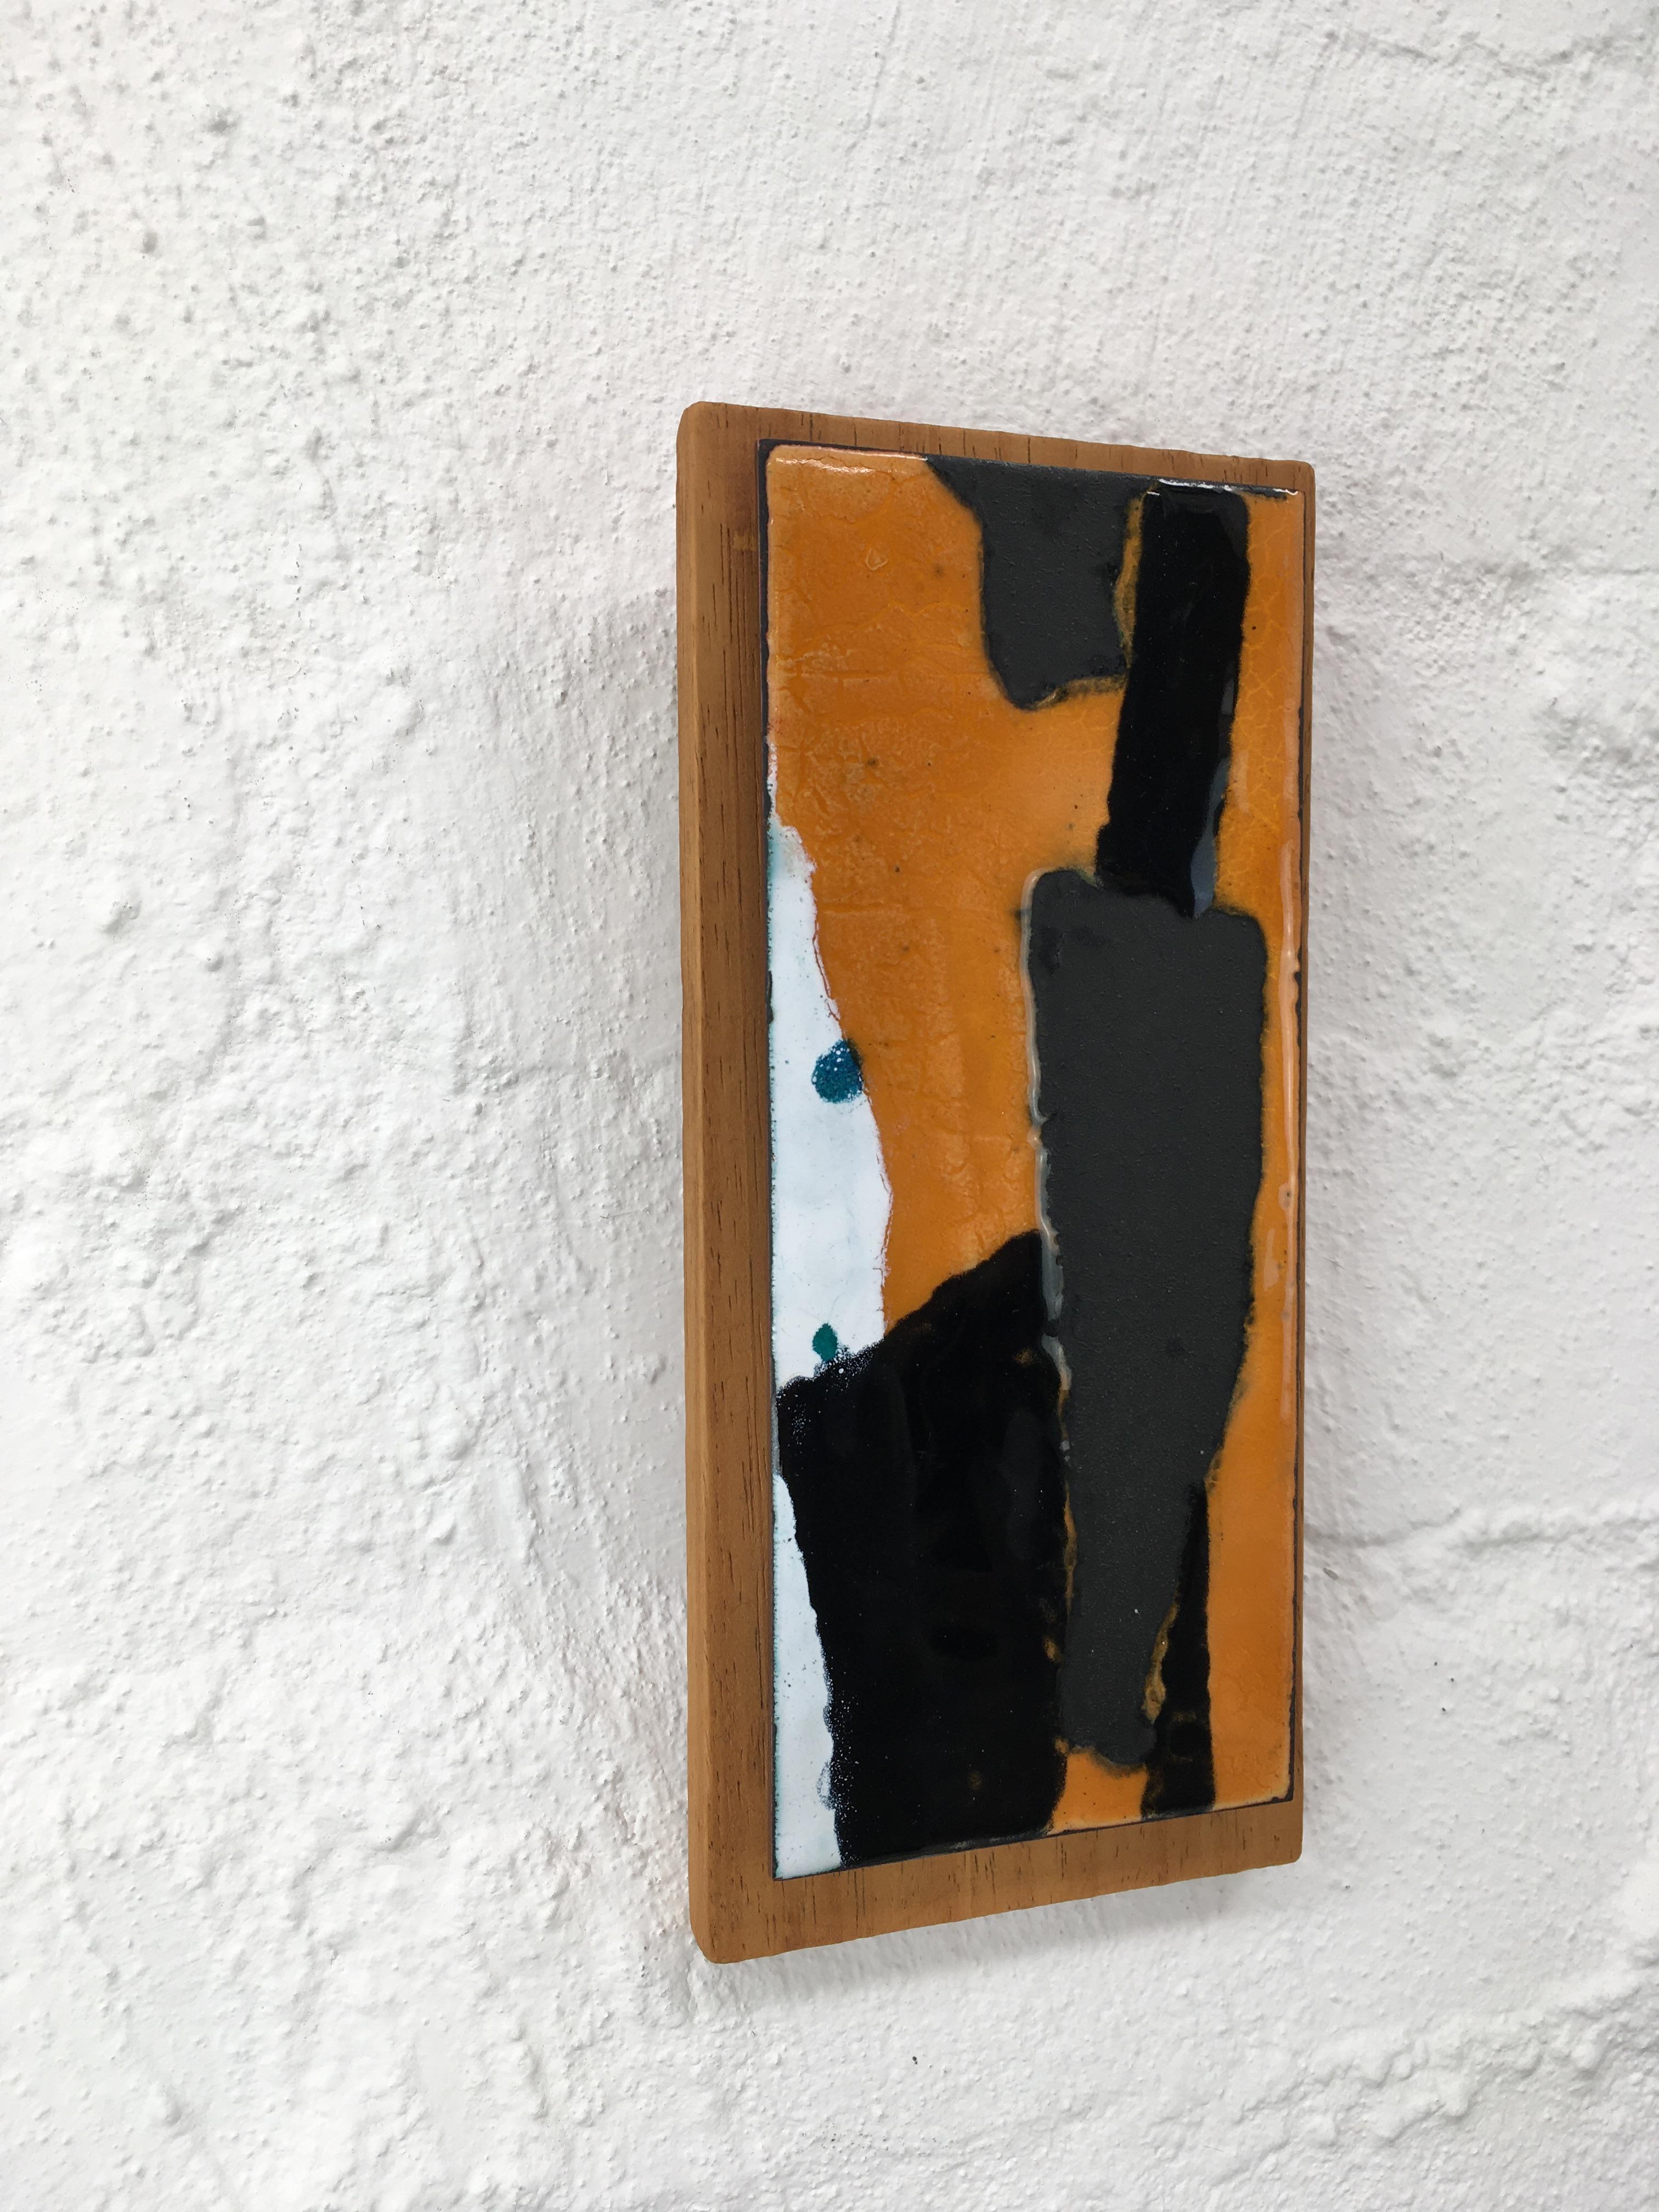 Australian 1970s Grey Gold and Black Enamel Abstract Wall Plaque Mounted on Elm Wood